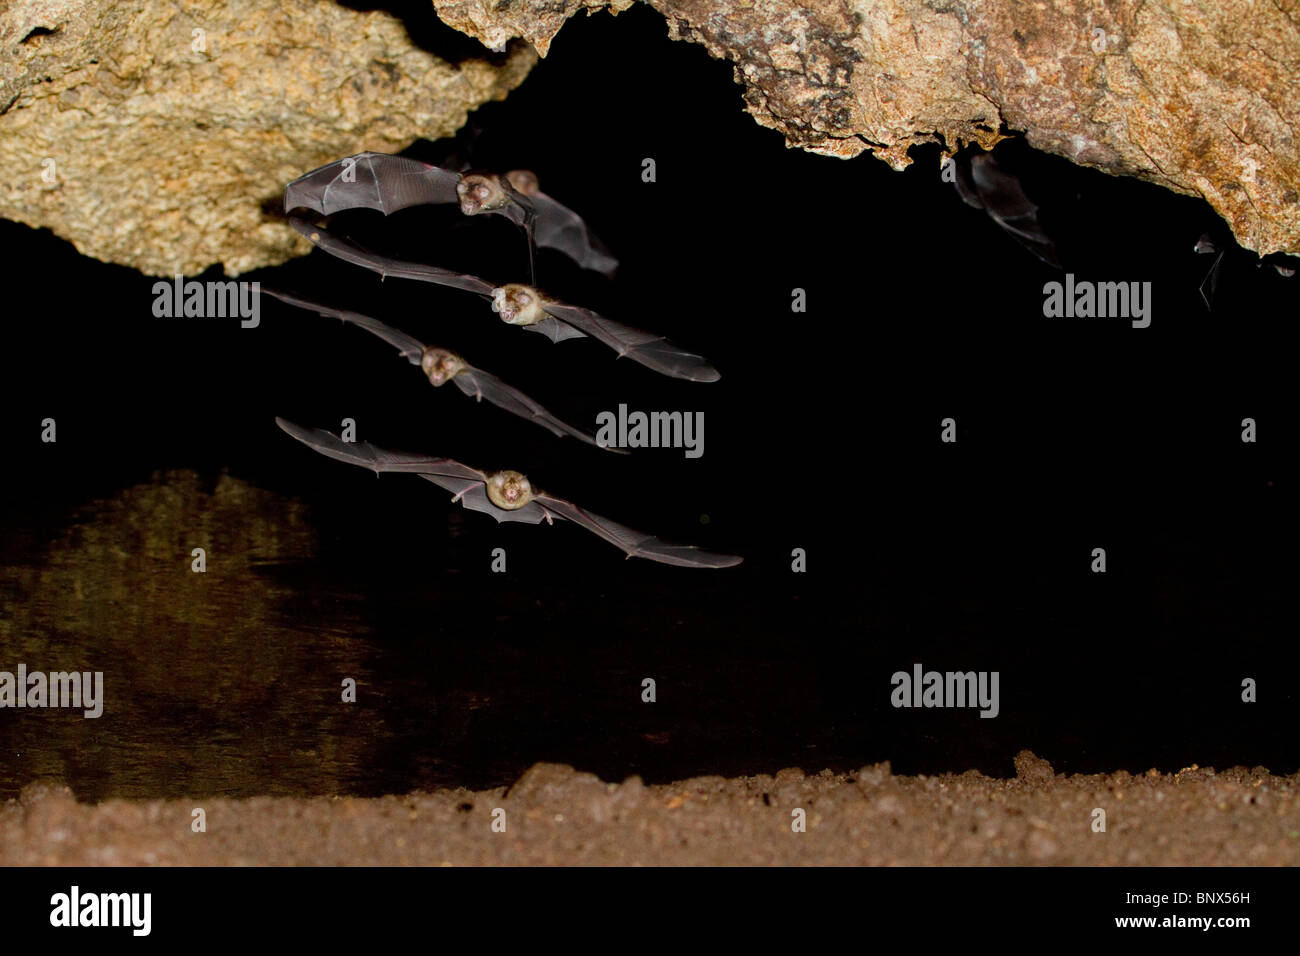 Synchronous flight of African trident bats (Triaenops afer) in cave, Kenya. Stock Photo